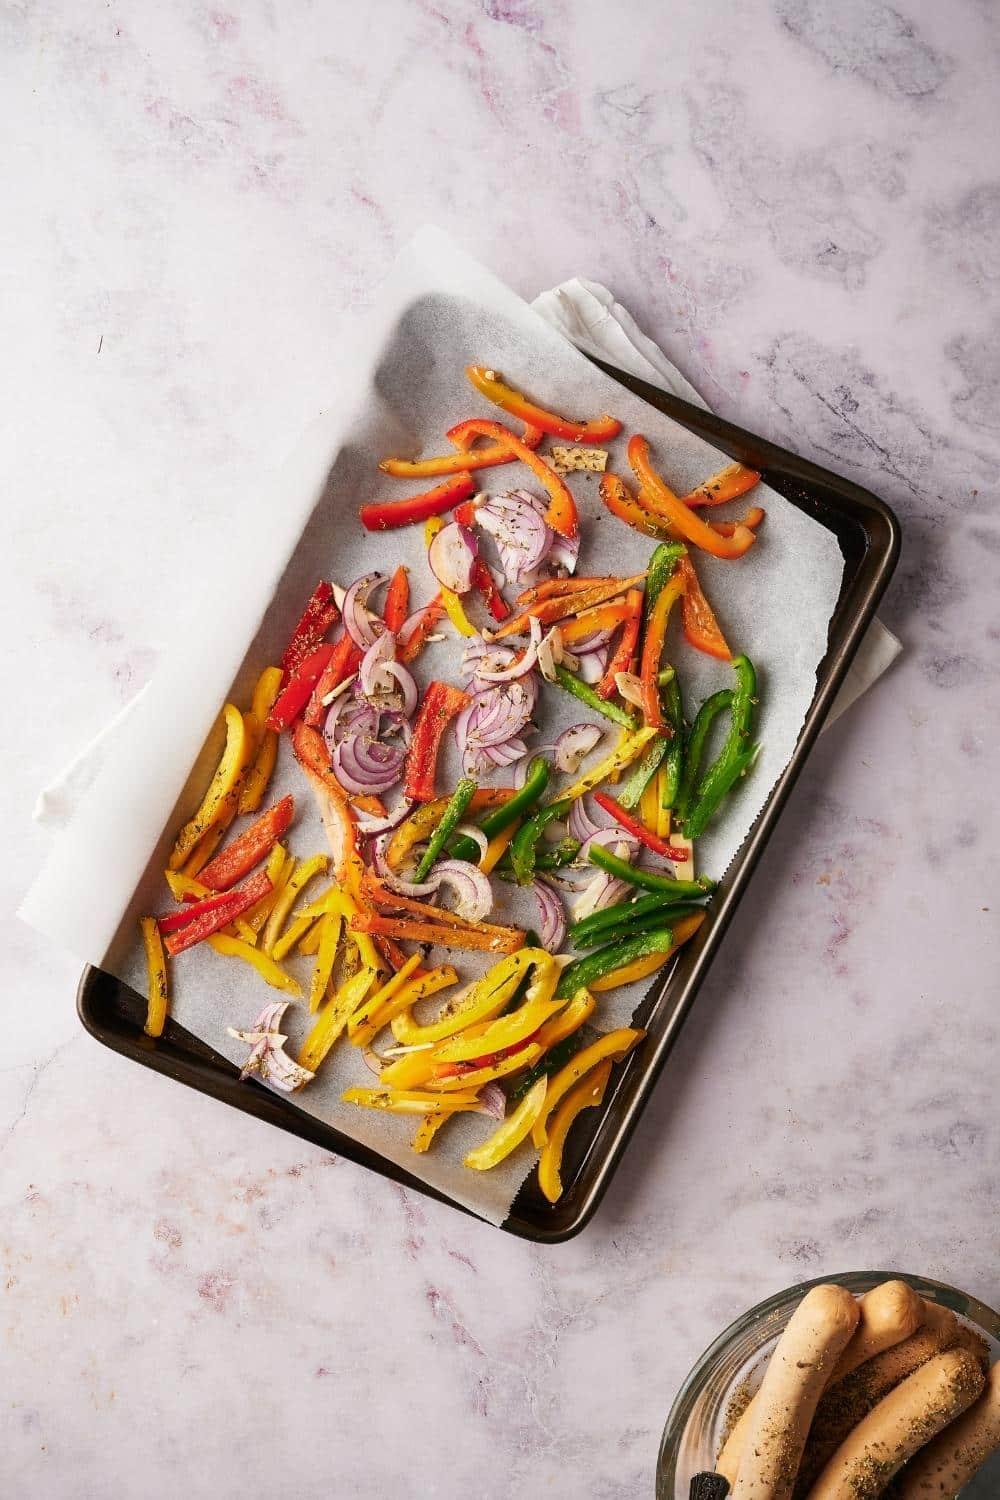 Sliced bell peppers and onions seasoned with herbs on a parchment paper lined baking tray.